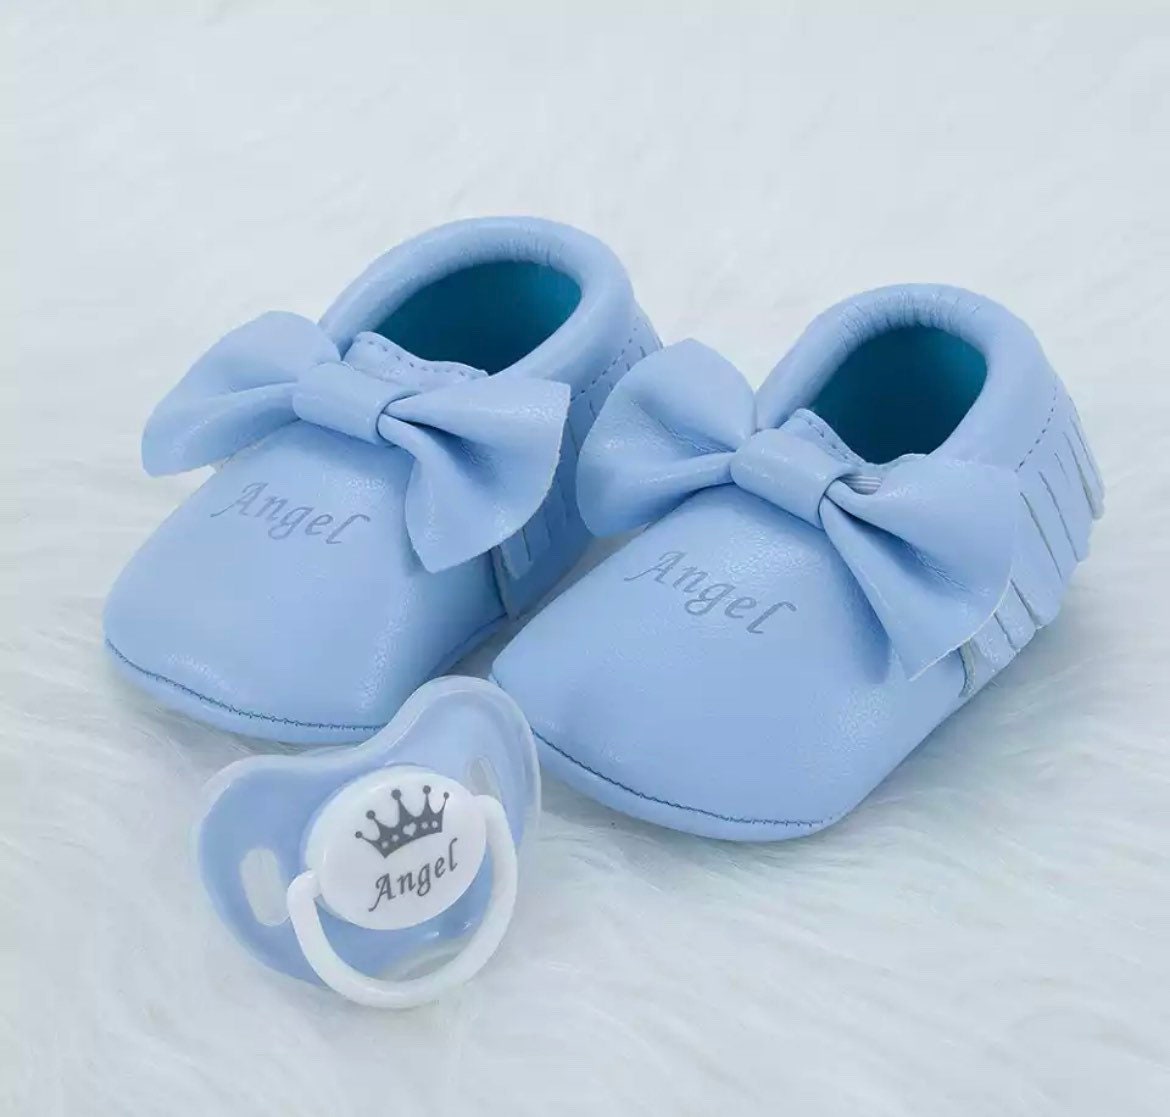 Newborn Baby Gift , Handmade Custom Pacifier, Personalised Baby Gift ,-
 CUSTOMIZATION - this is a handmade item, you can request any colour or name on shoes and pacifier.You can add any name on the pacifier and a name.Please write exac-Bijou Bubs